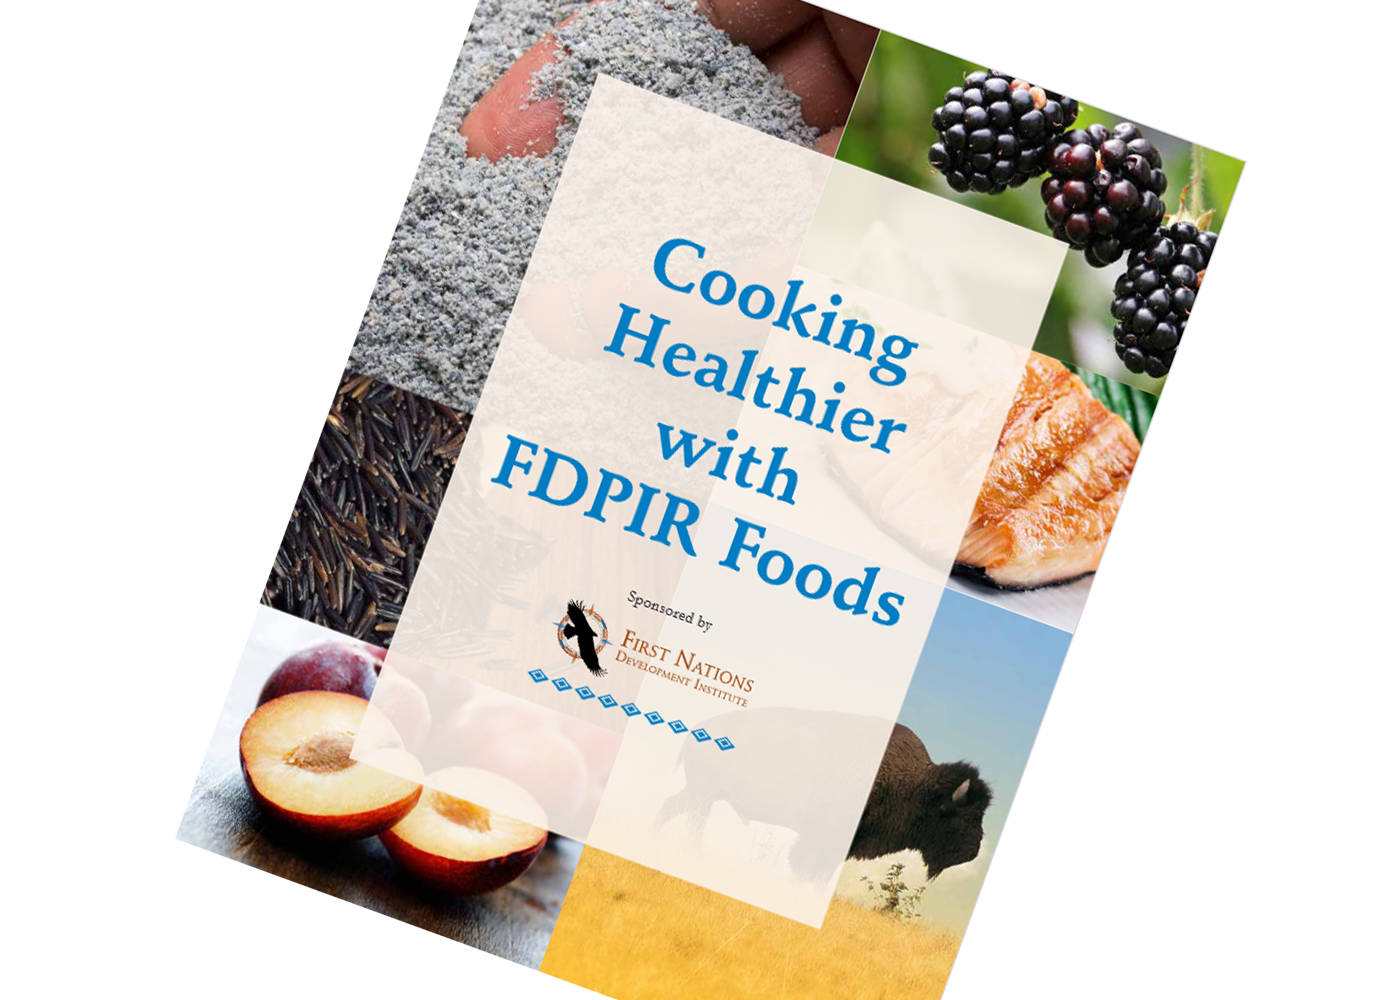 Cover of "Cooking Healthier with FDPIR Foods" cookbook